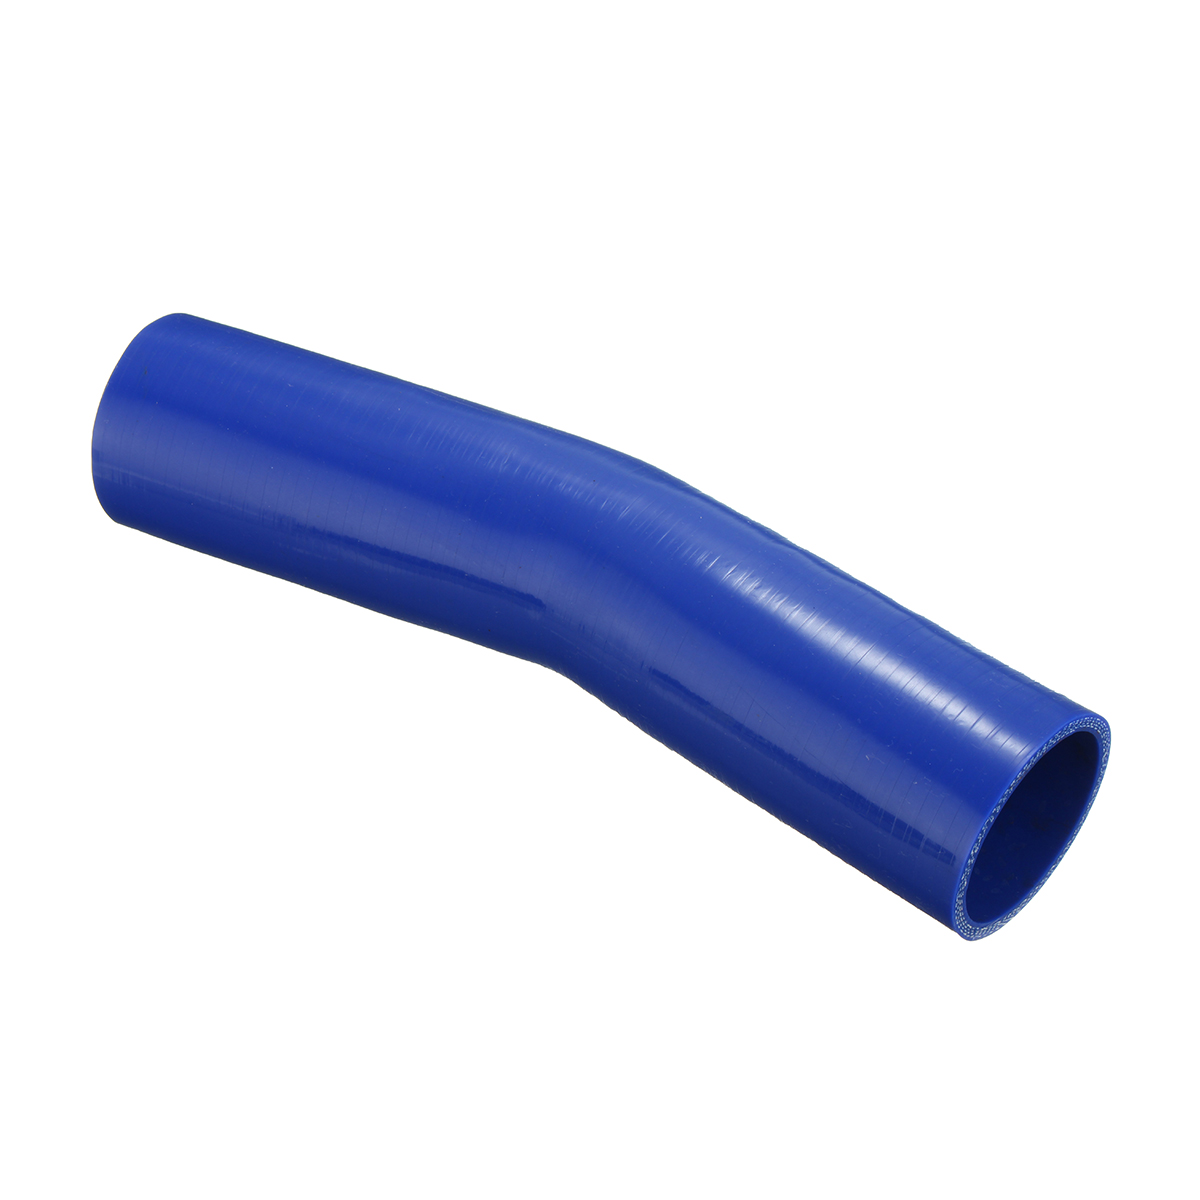 150mm-Silicone-Hose-Rubber-15-Degree-Elbow-Bend-Hose-Air-Water-Coolant-Joiner-Pipe-Tube-1587657-5